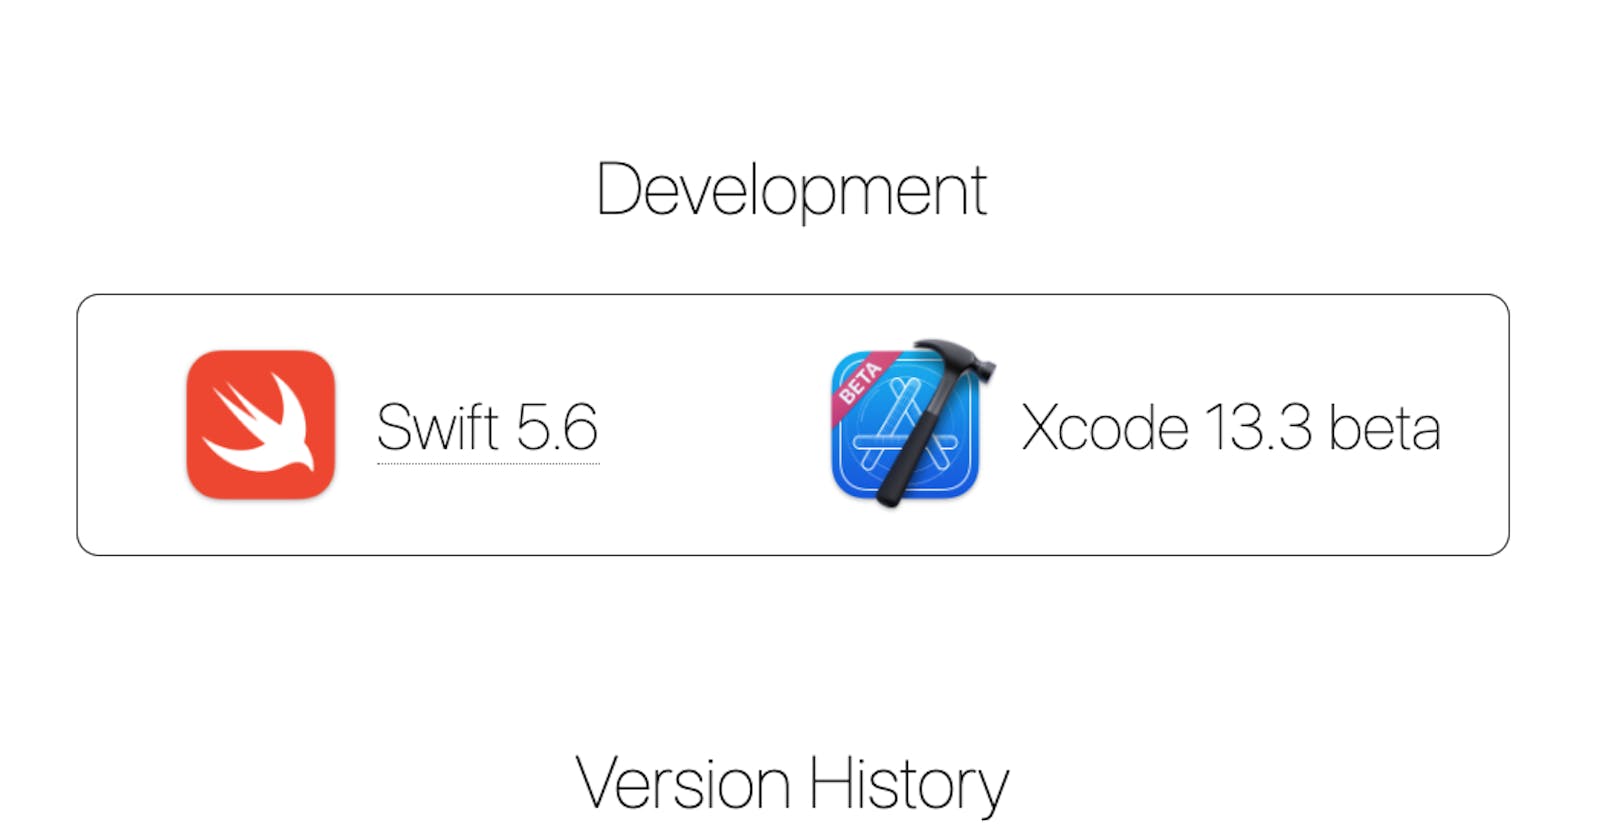 Easily displaying the Swift version that ships with Xcode